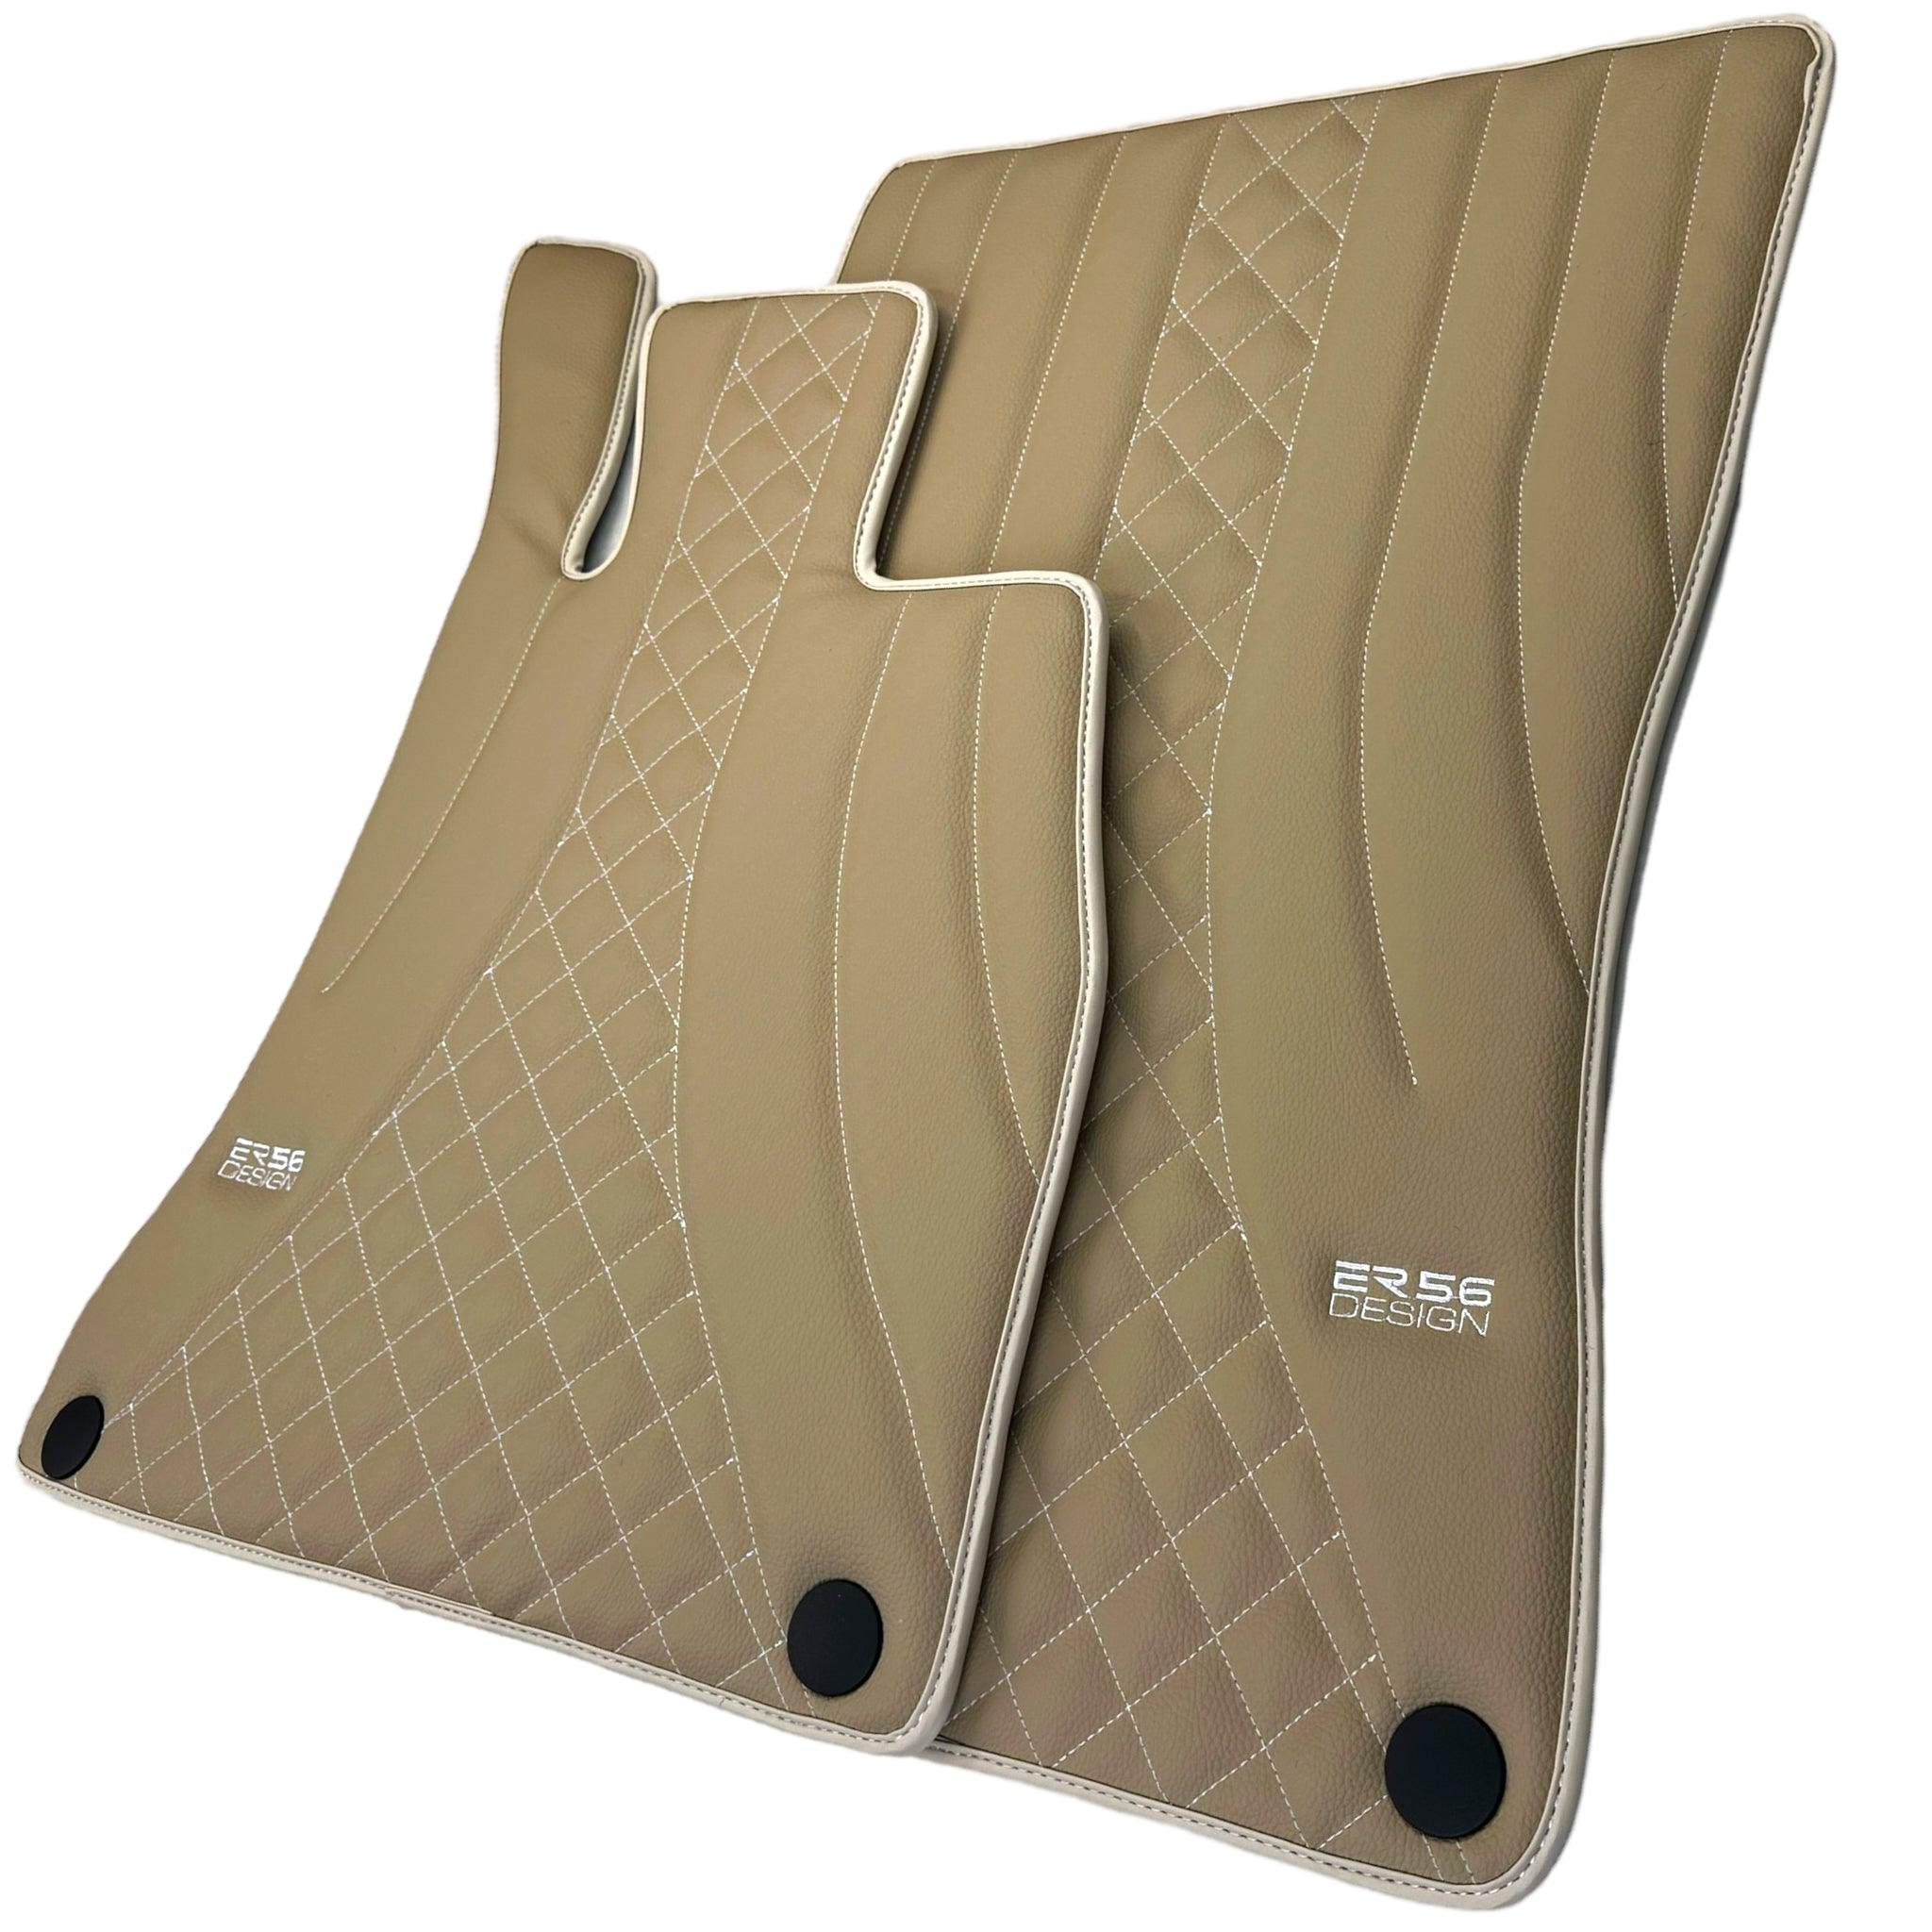 Beige Leather Floor Mats For Mercedes Benz E-Class C207 Coupe (2009-2013)